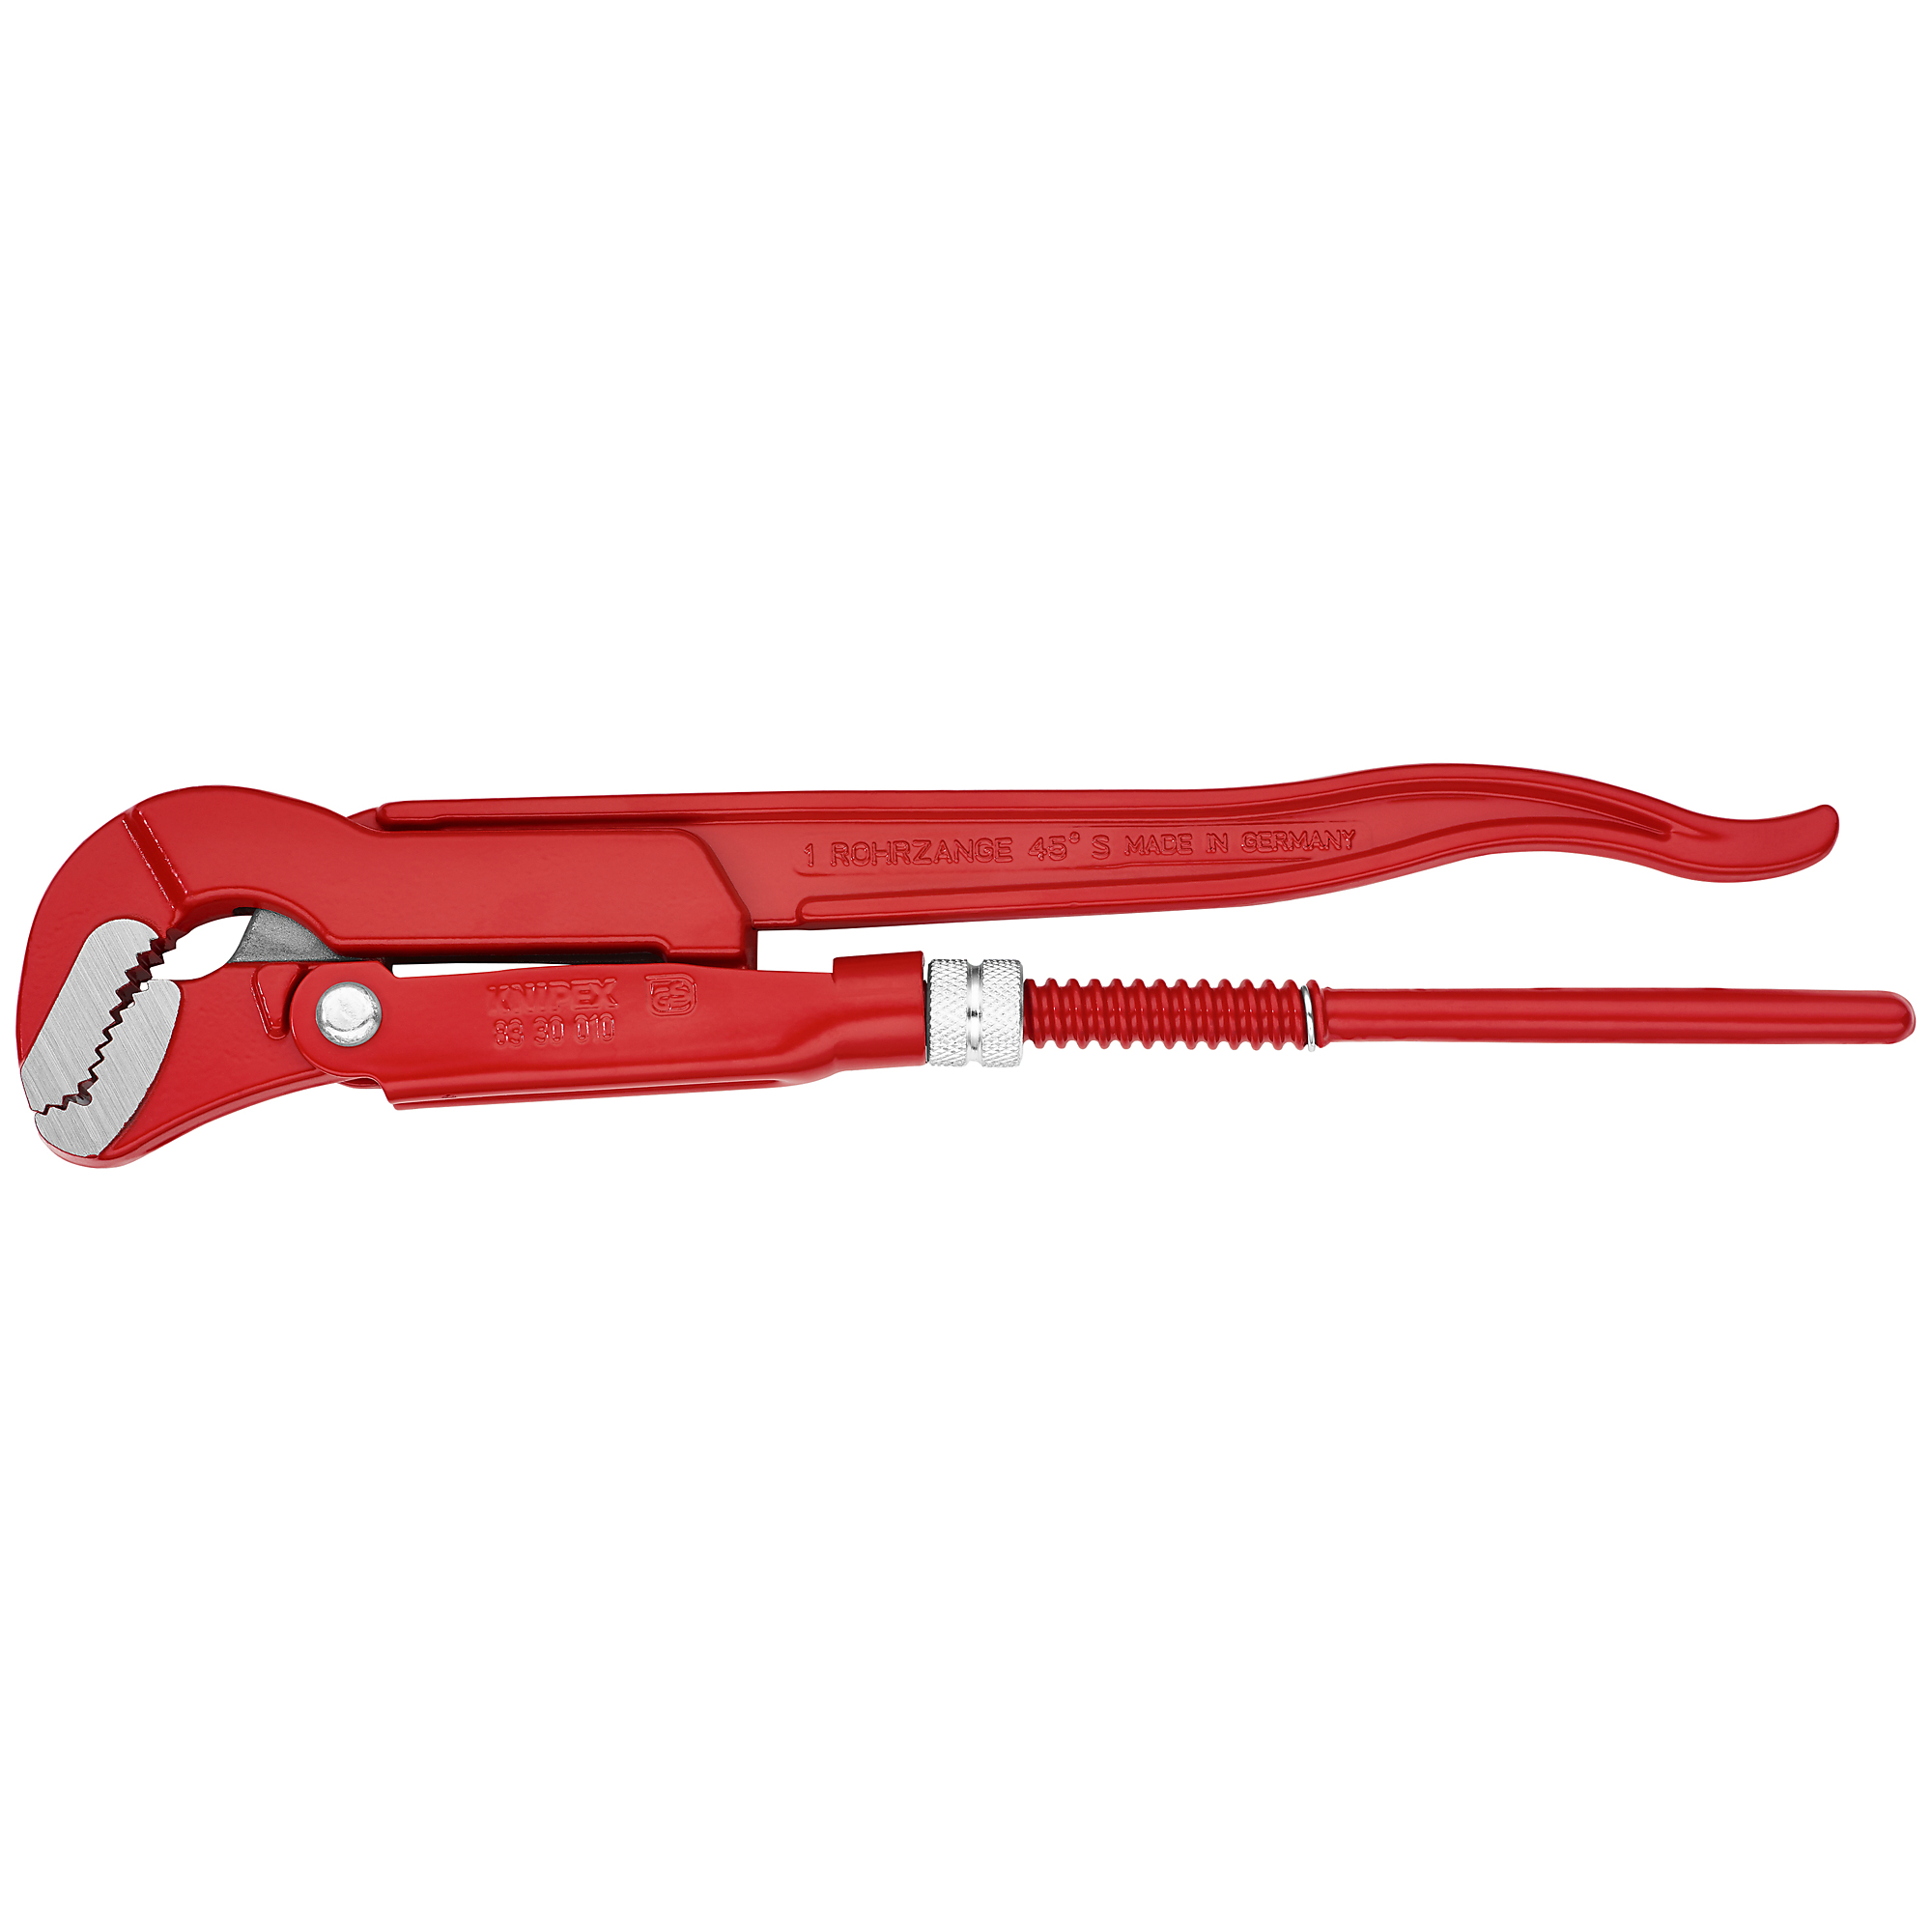 KNIPEX, Swedish Pipe Wrench-S-Type, 12.5Inch, Pieces (qty.) 1 Material Steel, Jaw Capacity 1.66 in, Model 83 30 010